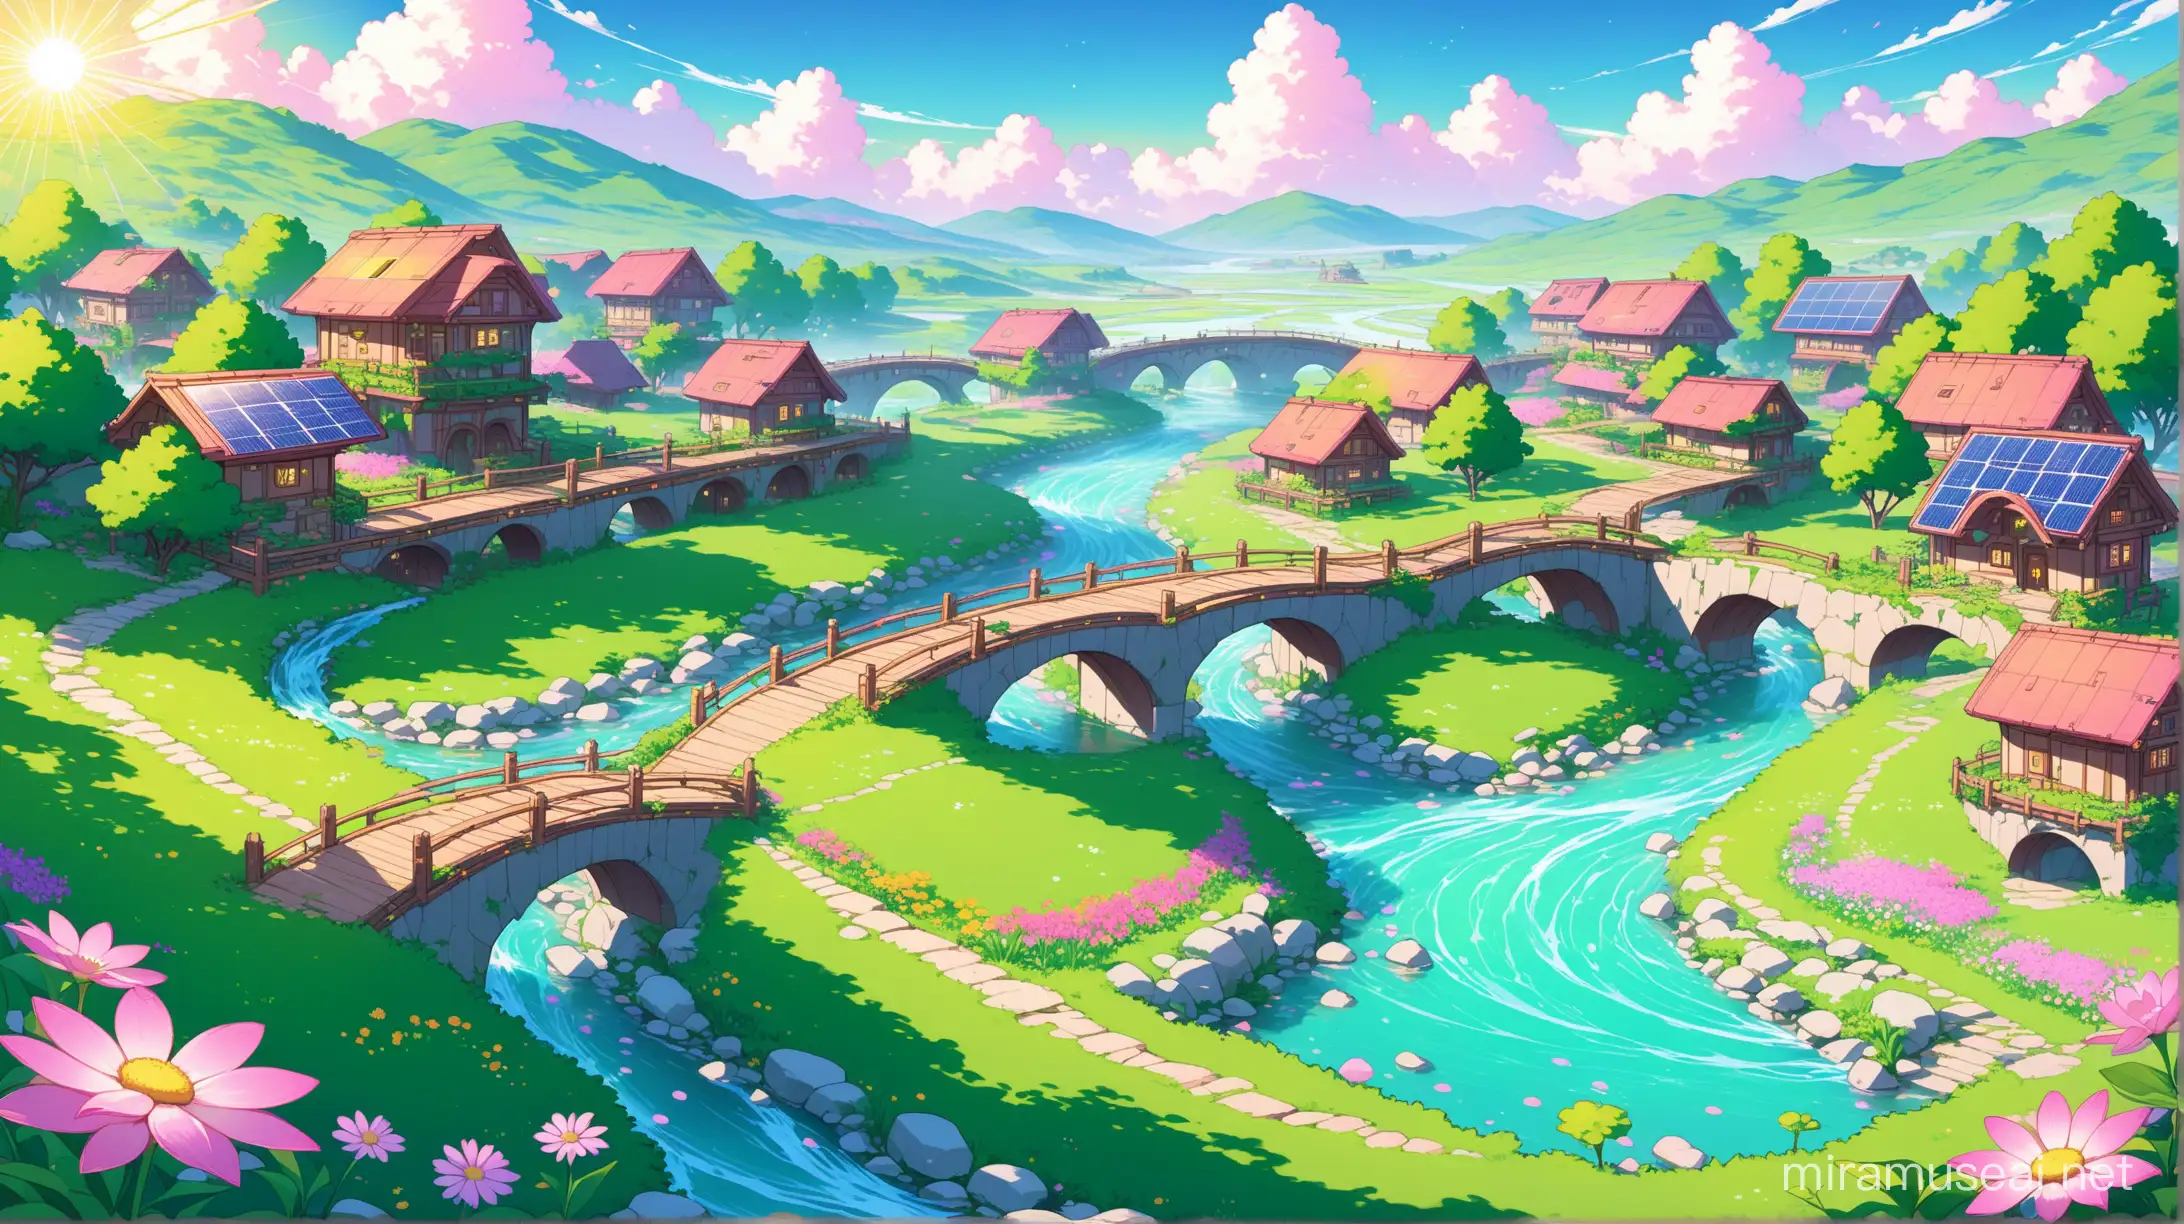 Pastel landscape of a solar punk village  set in the future. With lots of green gardens and flowers. Stream flowing through with a stone bridge.